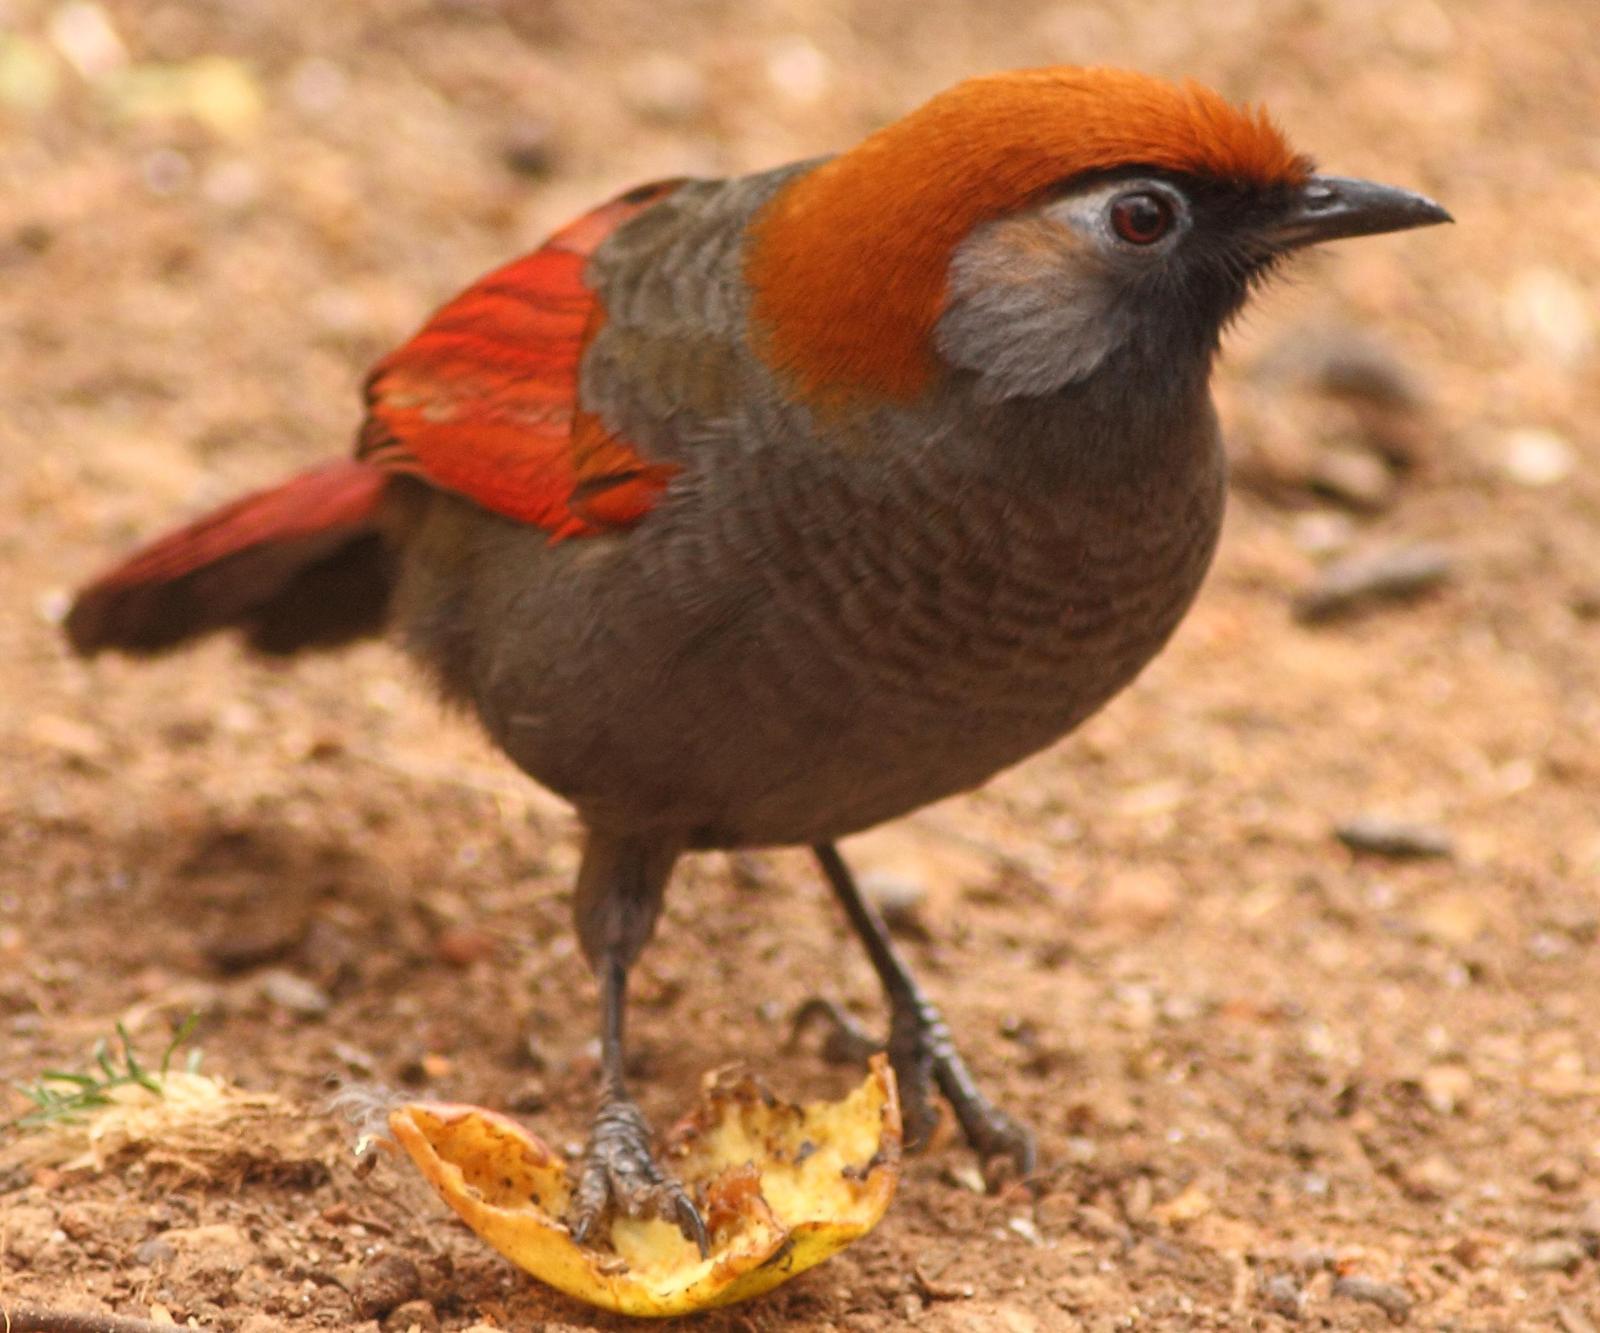 Red-tailed Laughingthrush Photo by Lee Harding